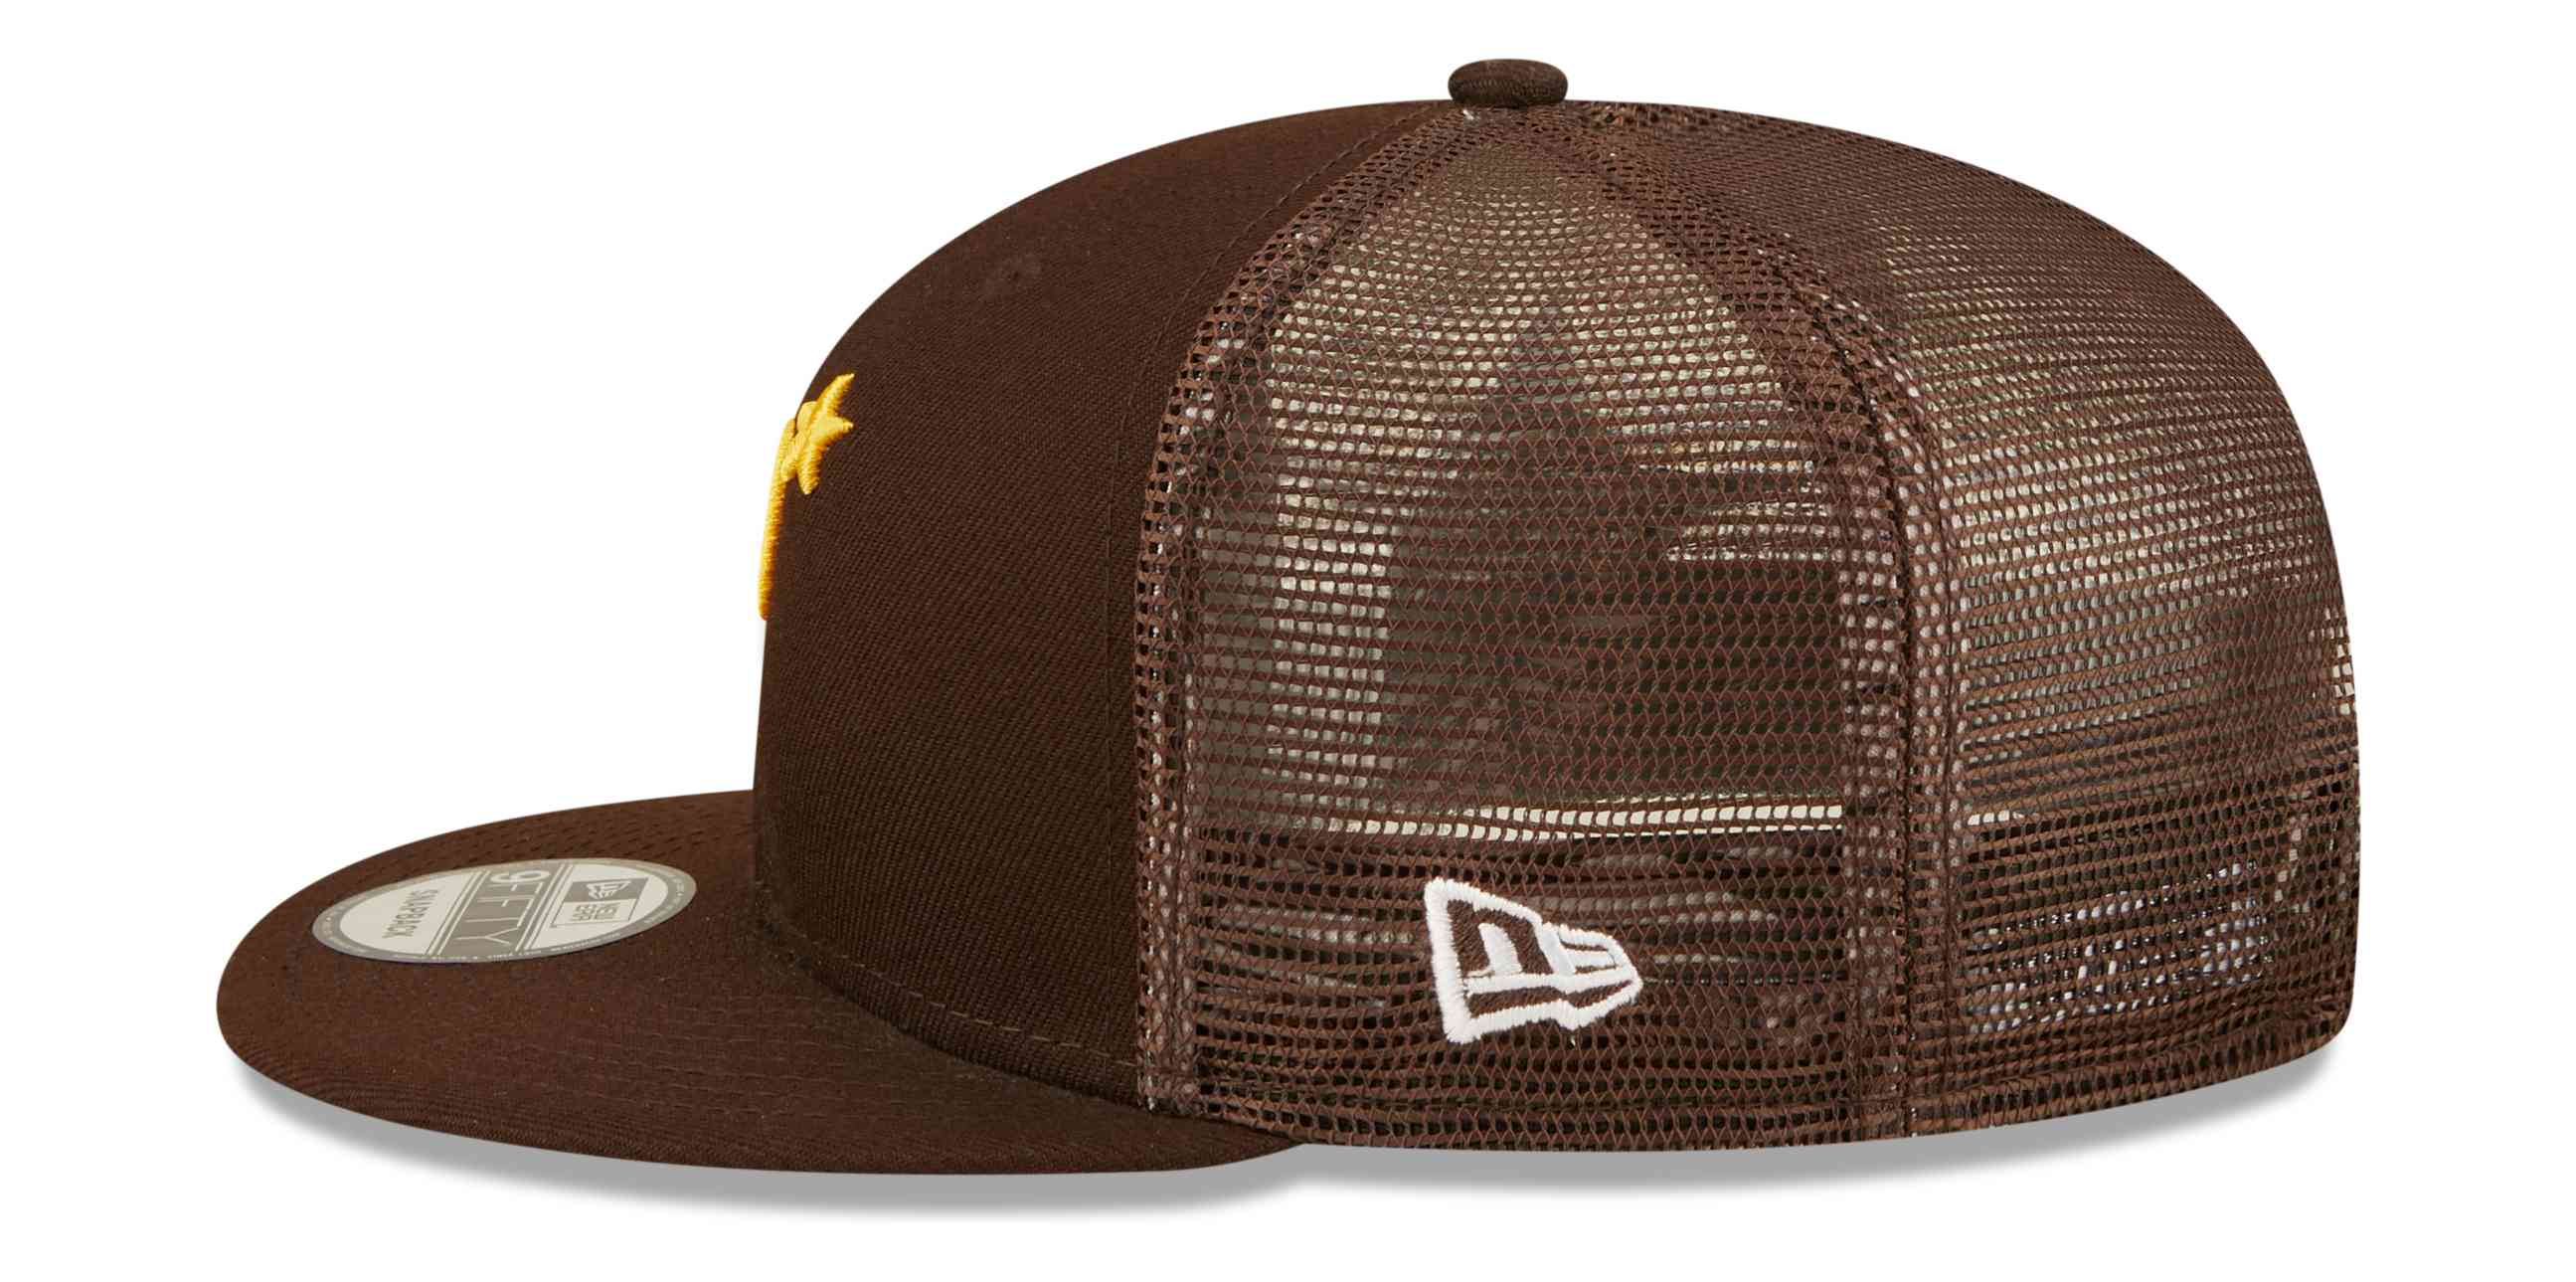 New Era - MLB San Diego Padres All Star Game Patch 9Fifty